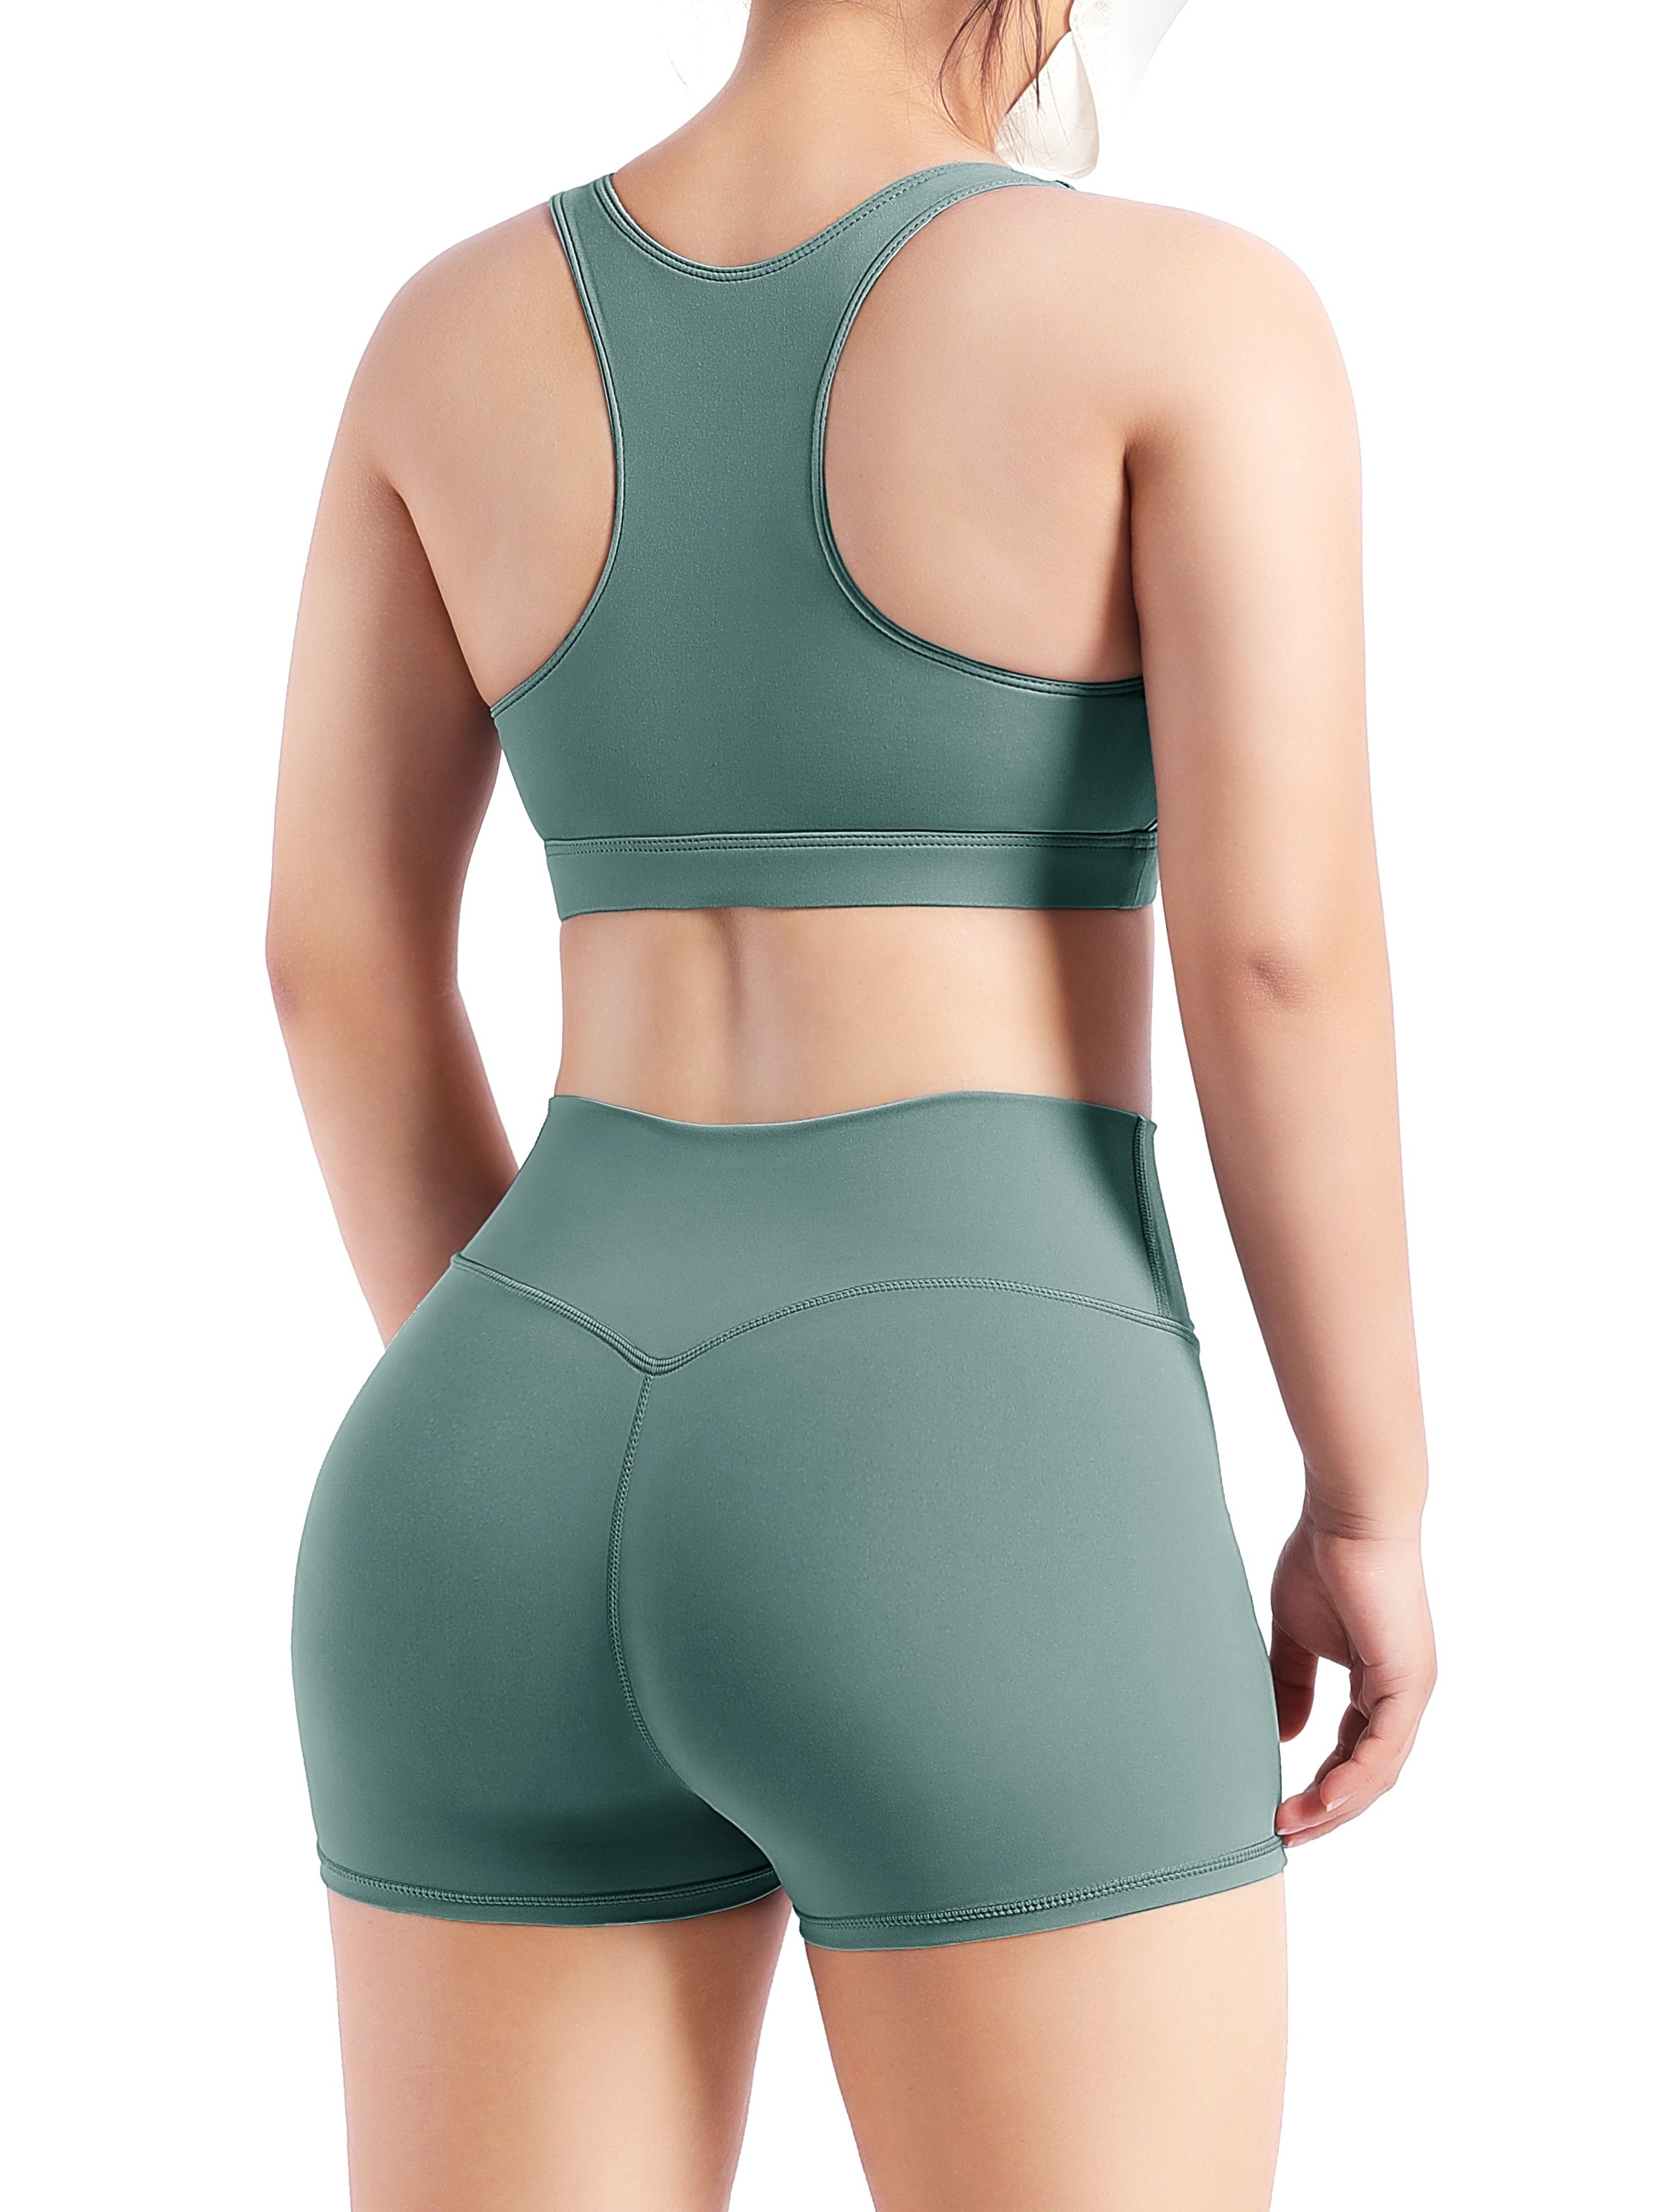 GYM RAINBOW Sports Bras for Women Padded Tank Tops Sleeveless Workout Crop  Tops with Built in Bra(#2 Jasmine Green,X-Small) at  Women's Clothing  store